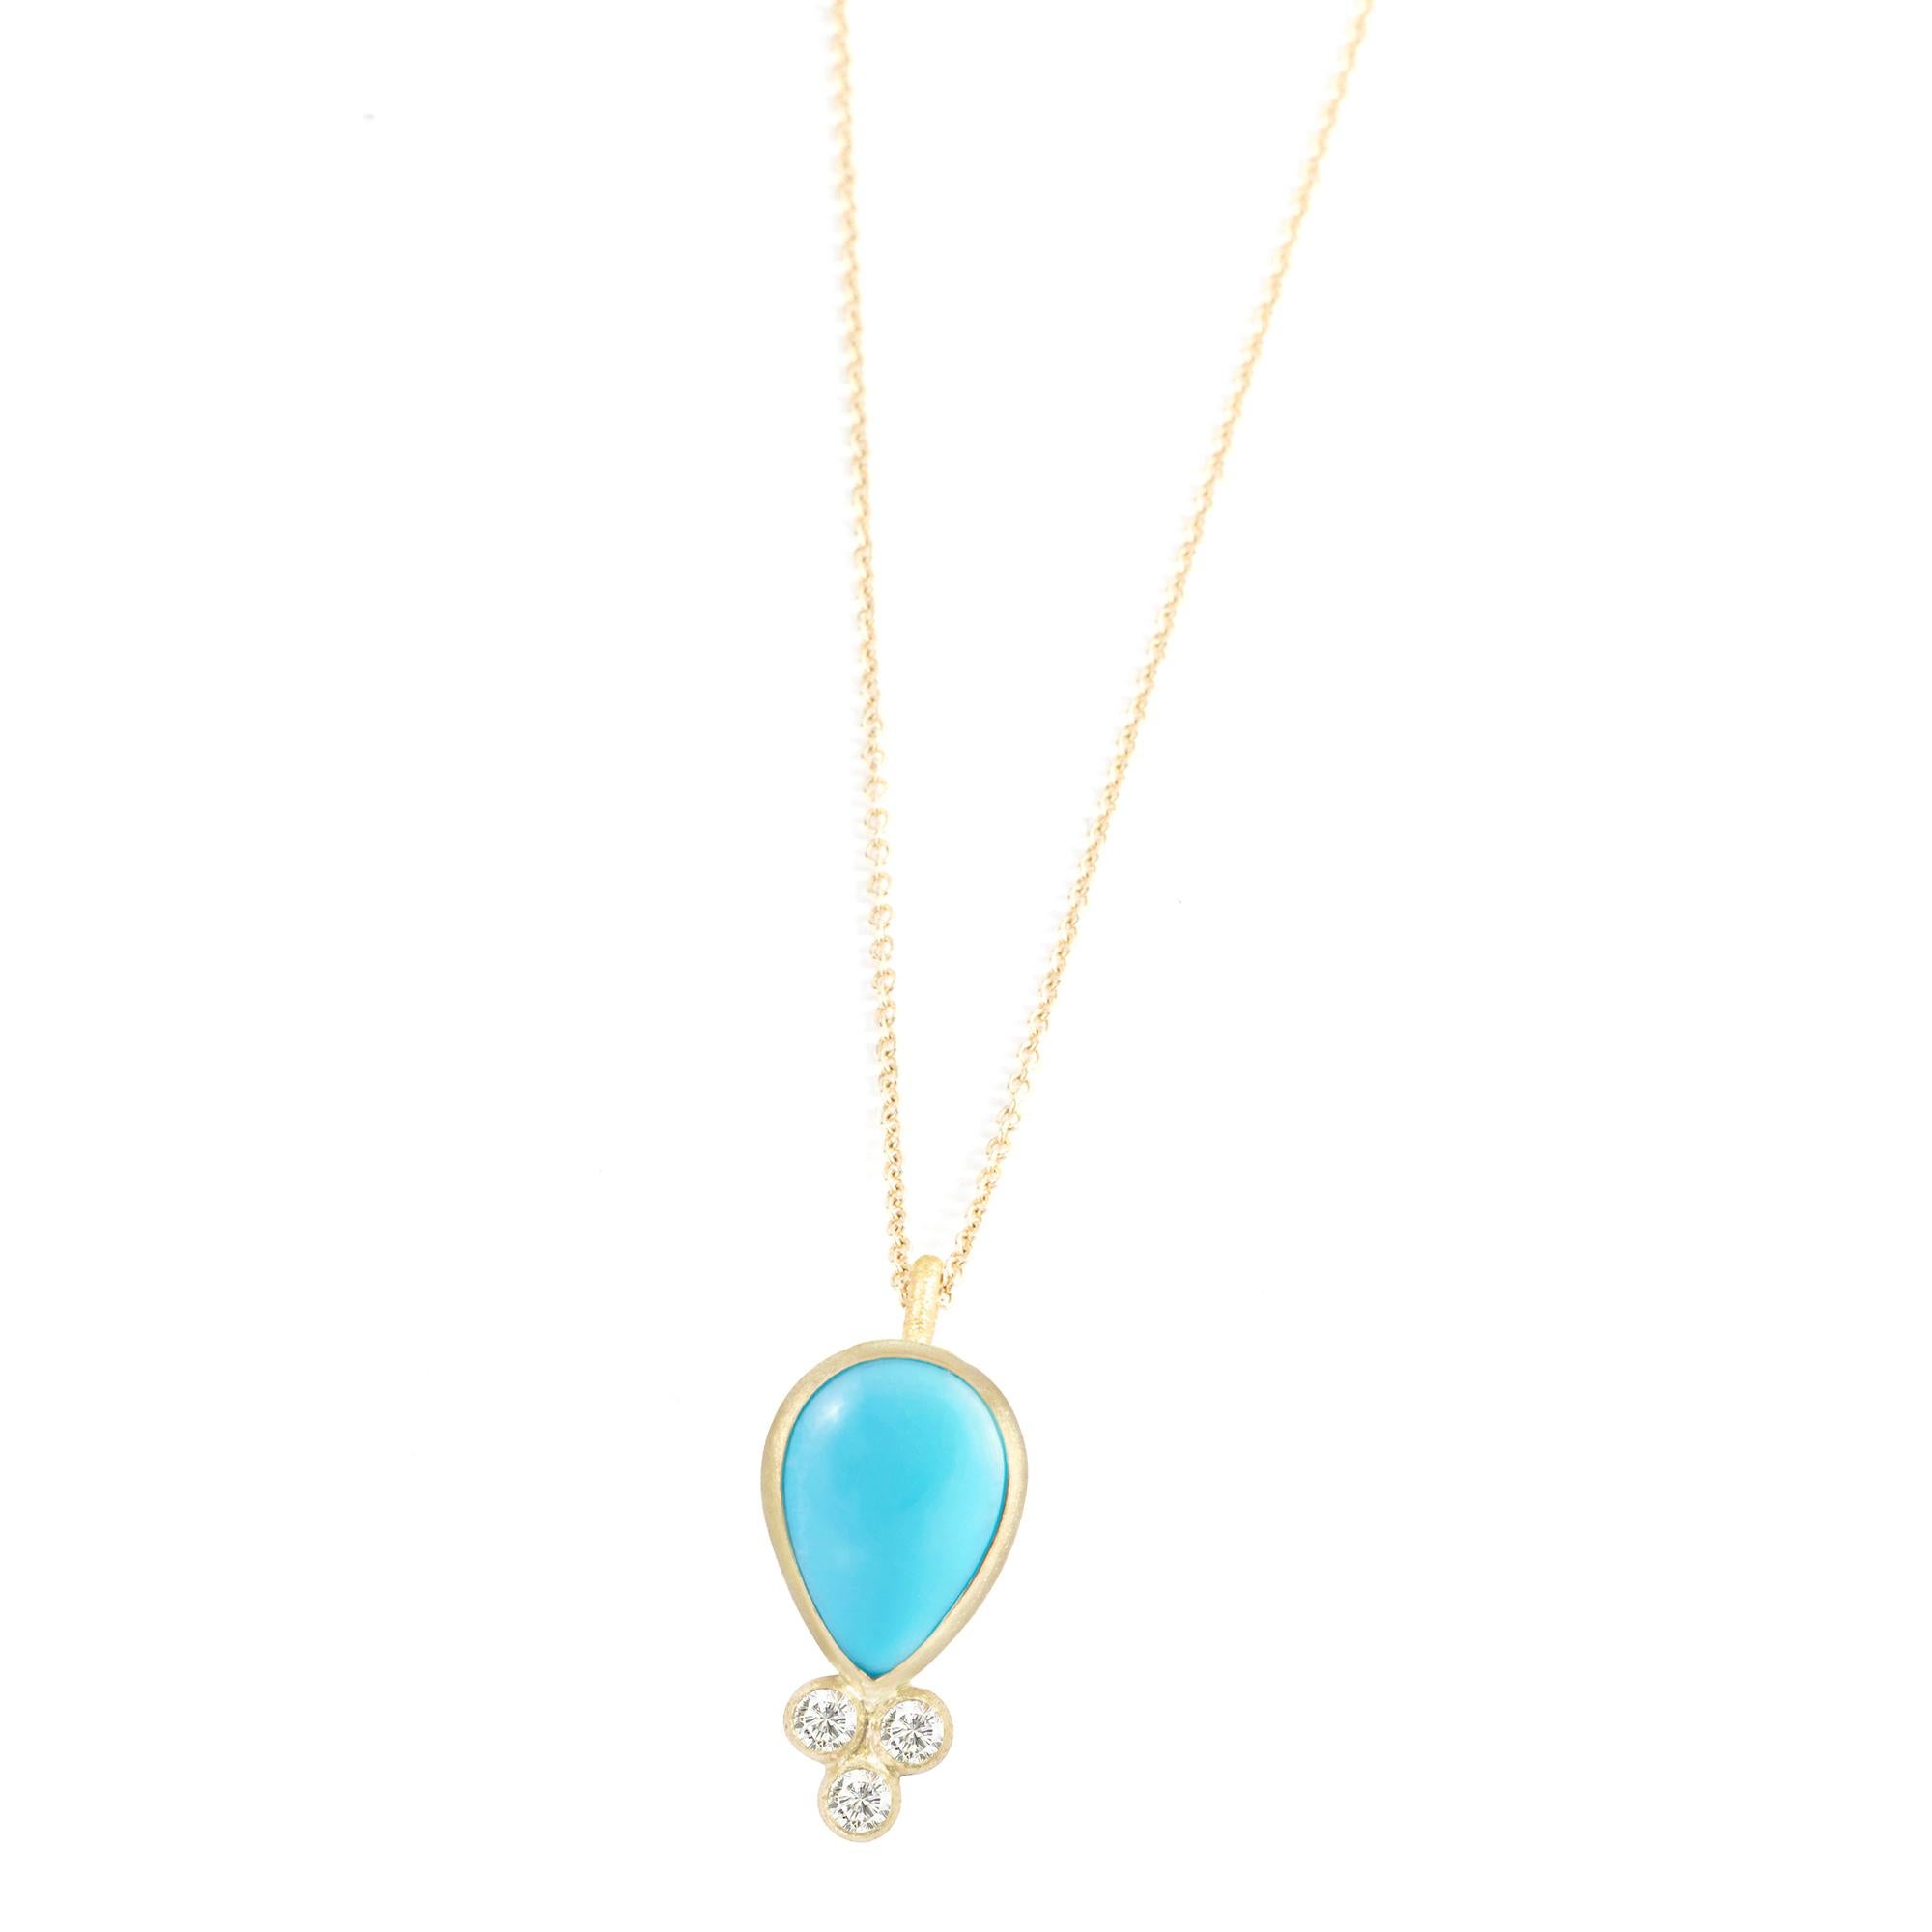 With its single, bezel-set sleeping beauty turquoise, the diamond-accented Lilly Gold Necklace is clean and elegant, and a very feminine style you can wear day in, day out.

Metal: 18K Yellow Gold
Stone carat: 1
Diamond carat: 0.0225
Length: